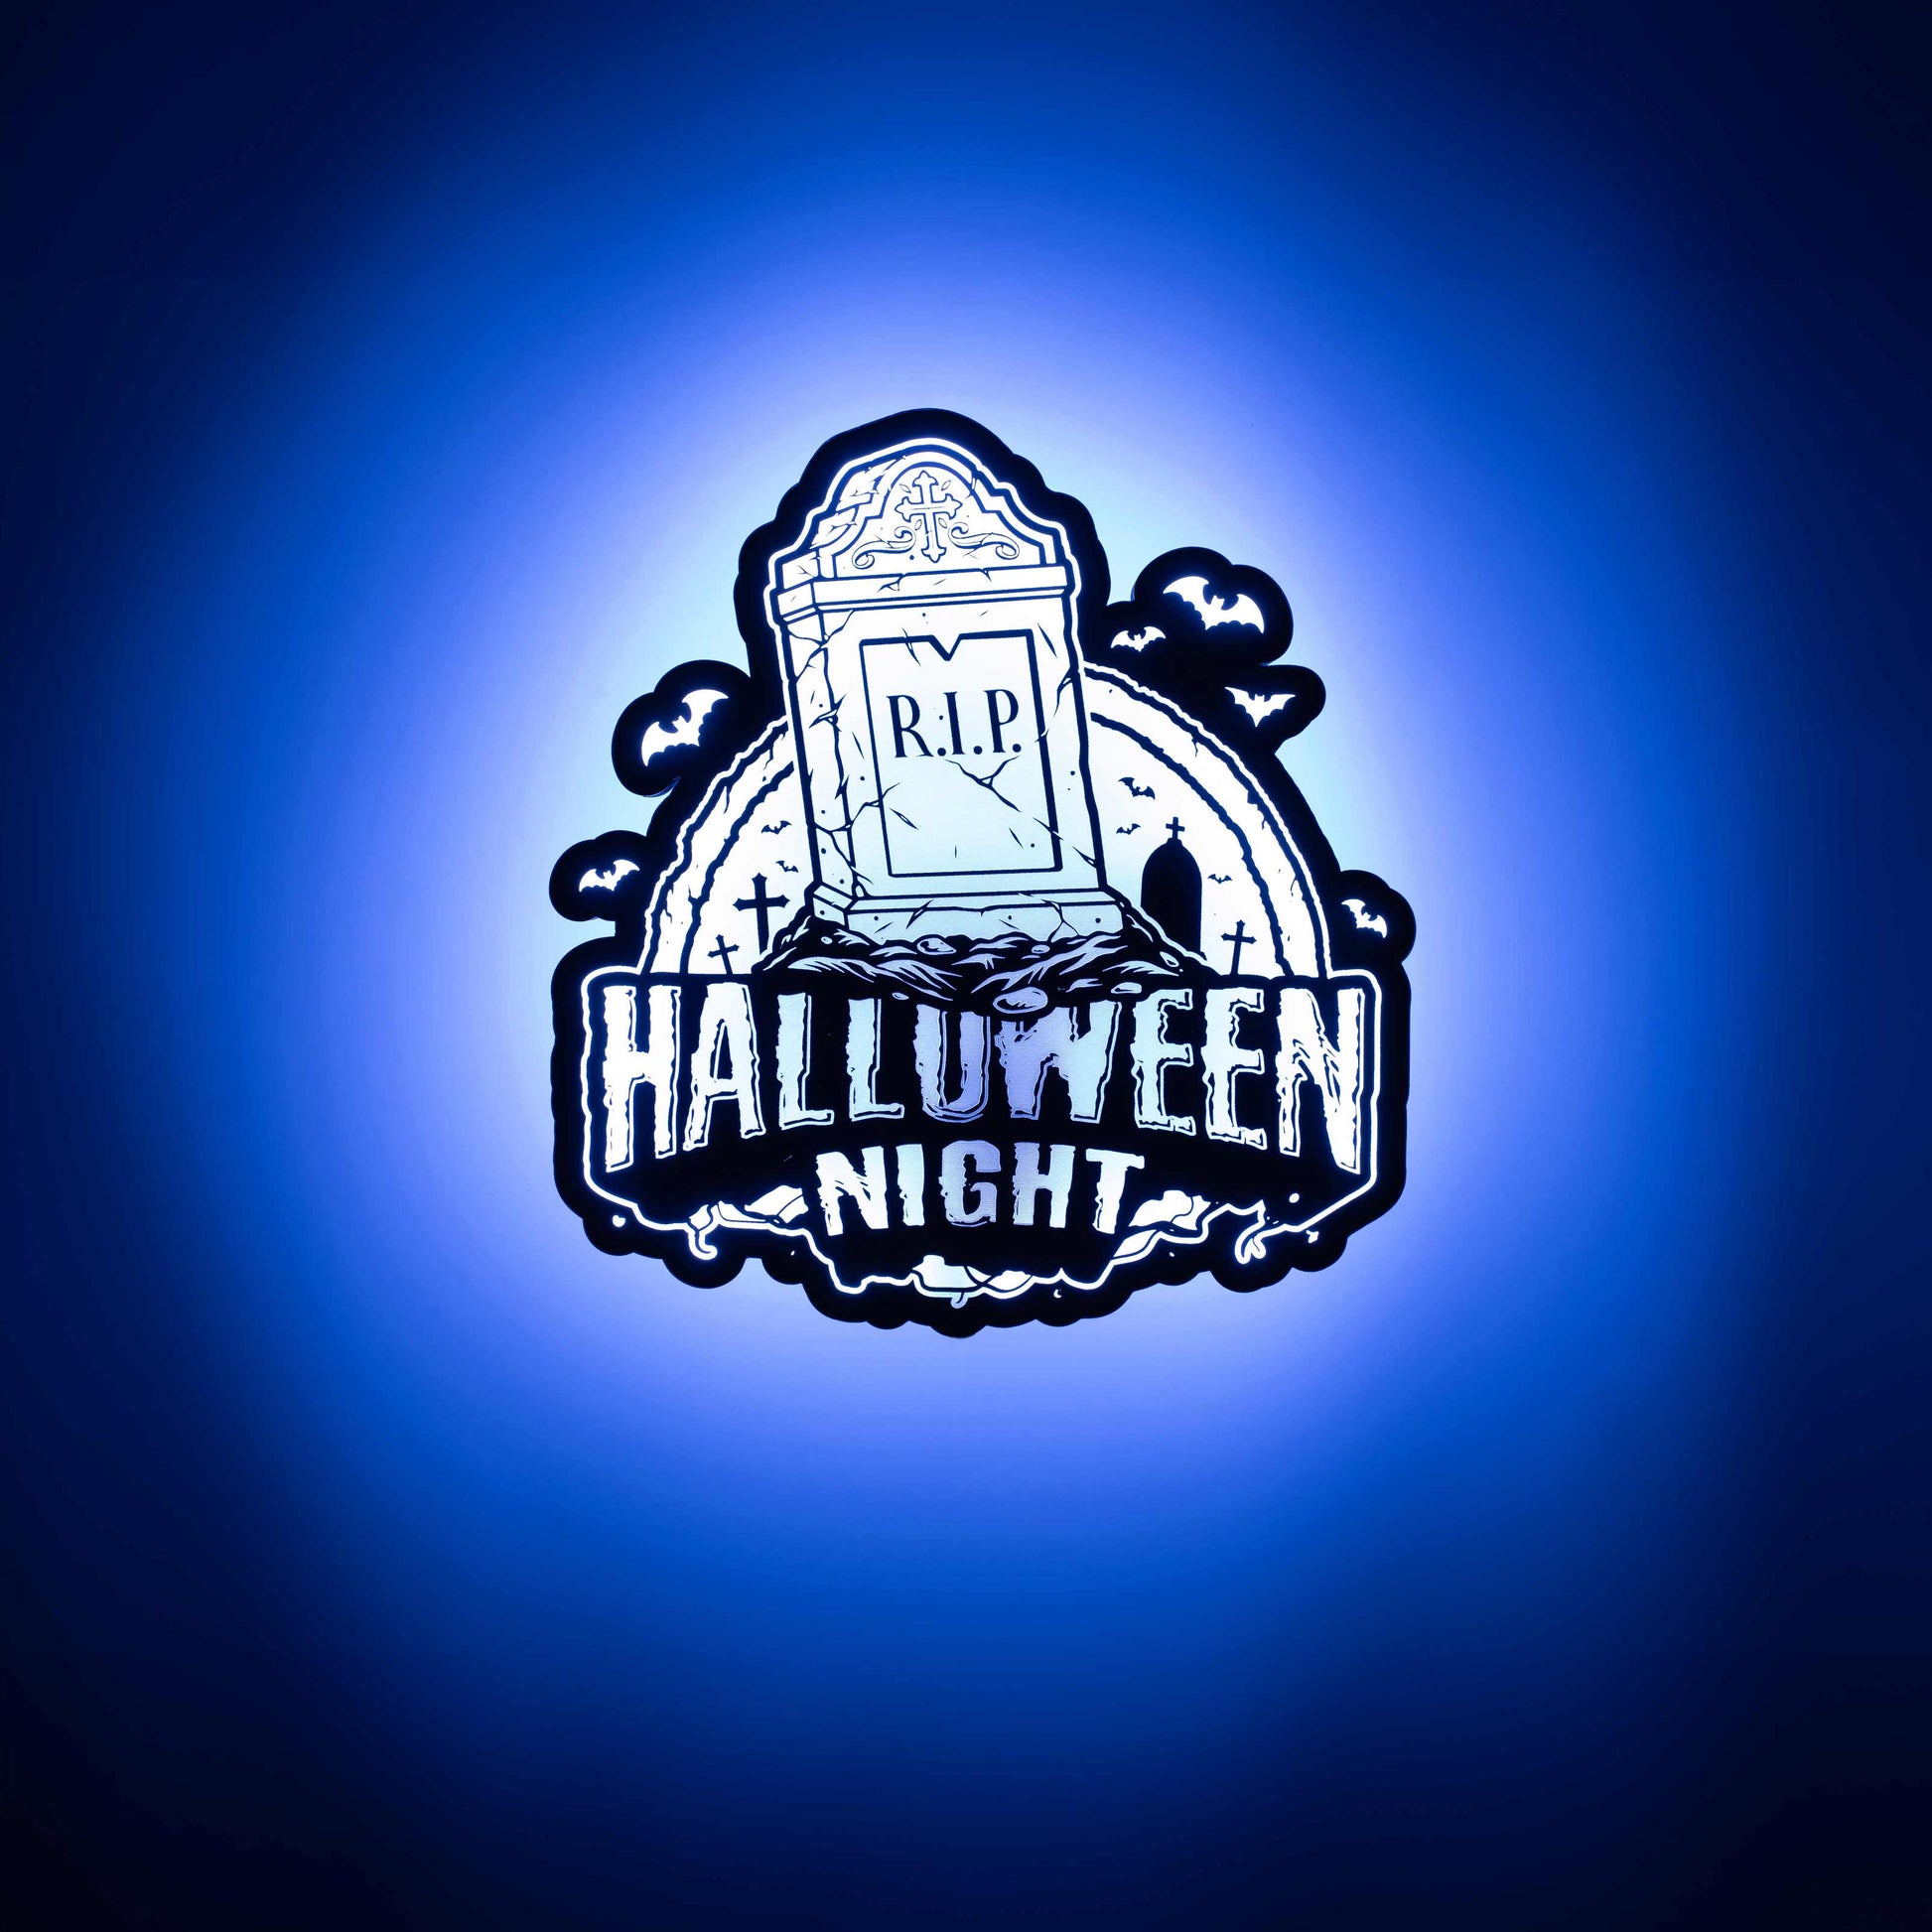 a 3d wall mounted acrylic light, backlit by multi-color led lights, featuring a cartoon style scary halloween themed illustration. A scary tomb stone rises up from a haunted grave yard scene complete with bats and spooky halloween themed text that reads "halloween night".